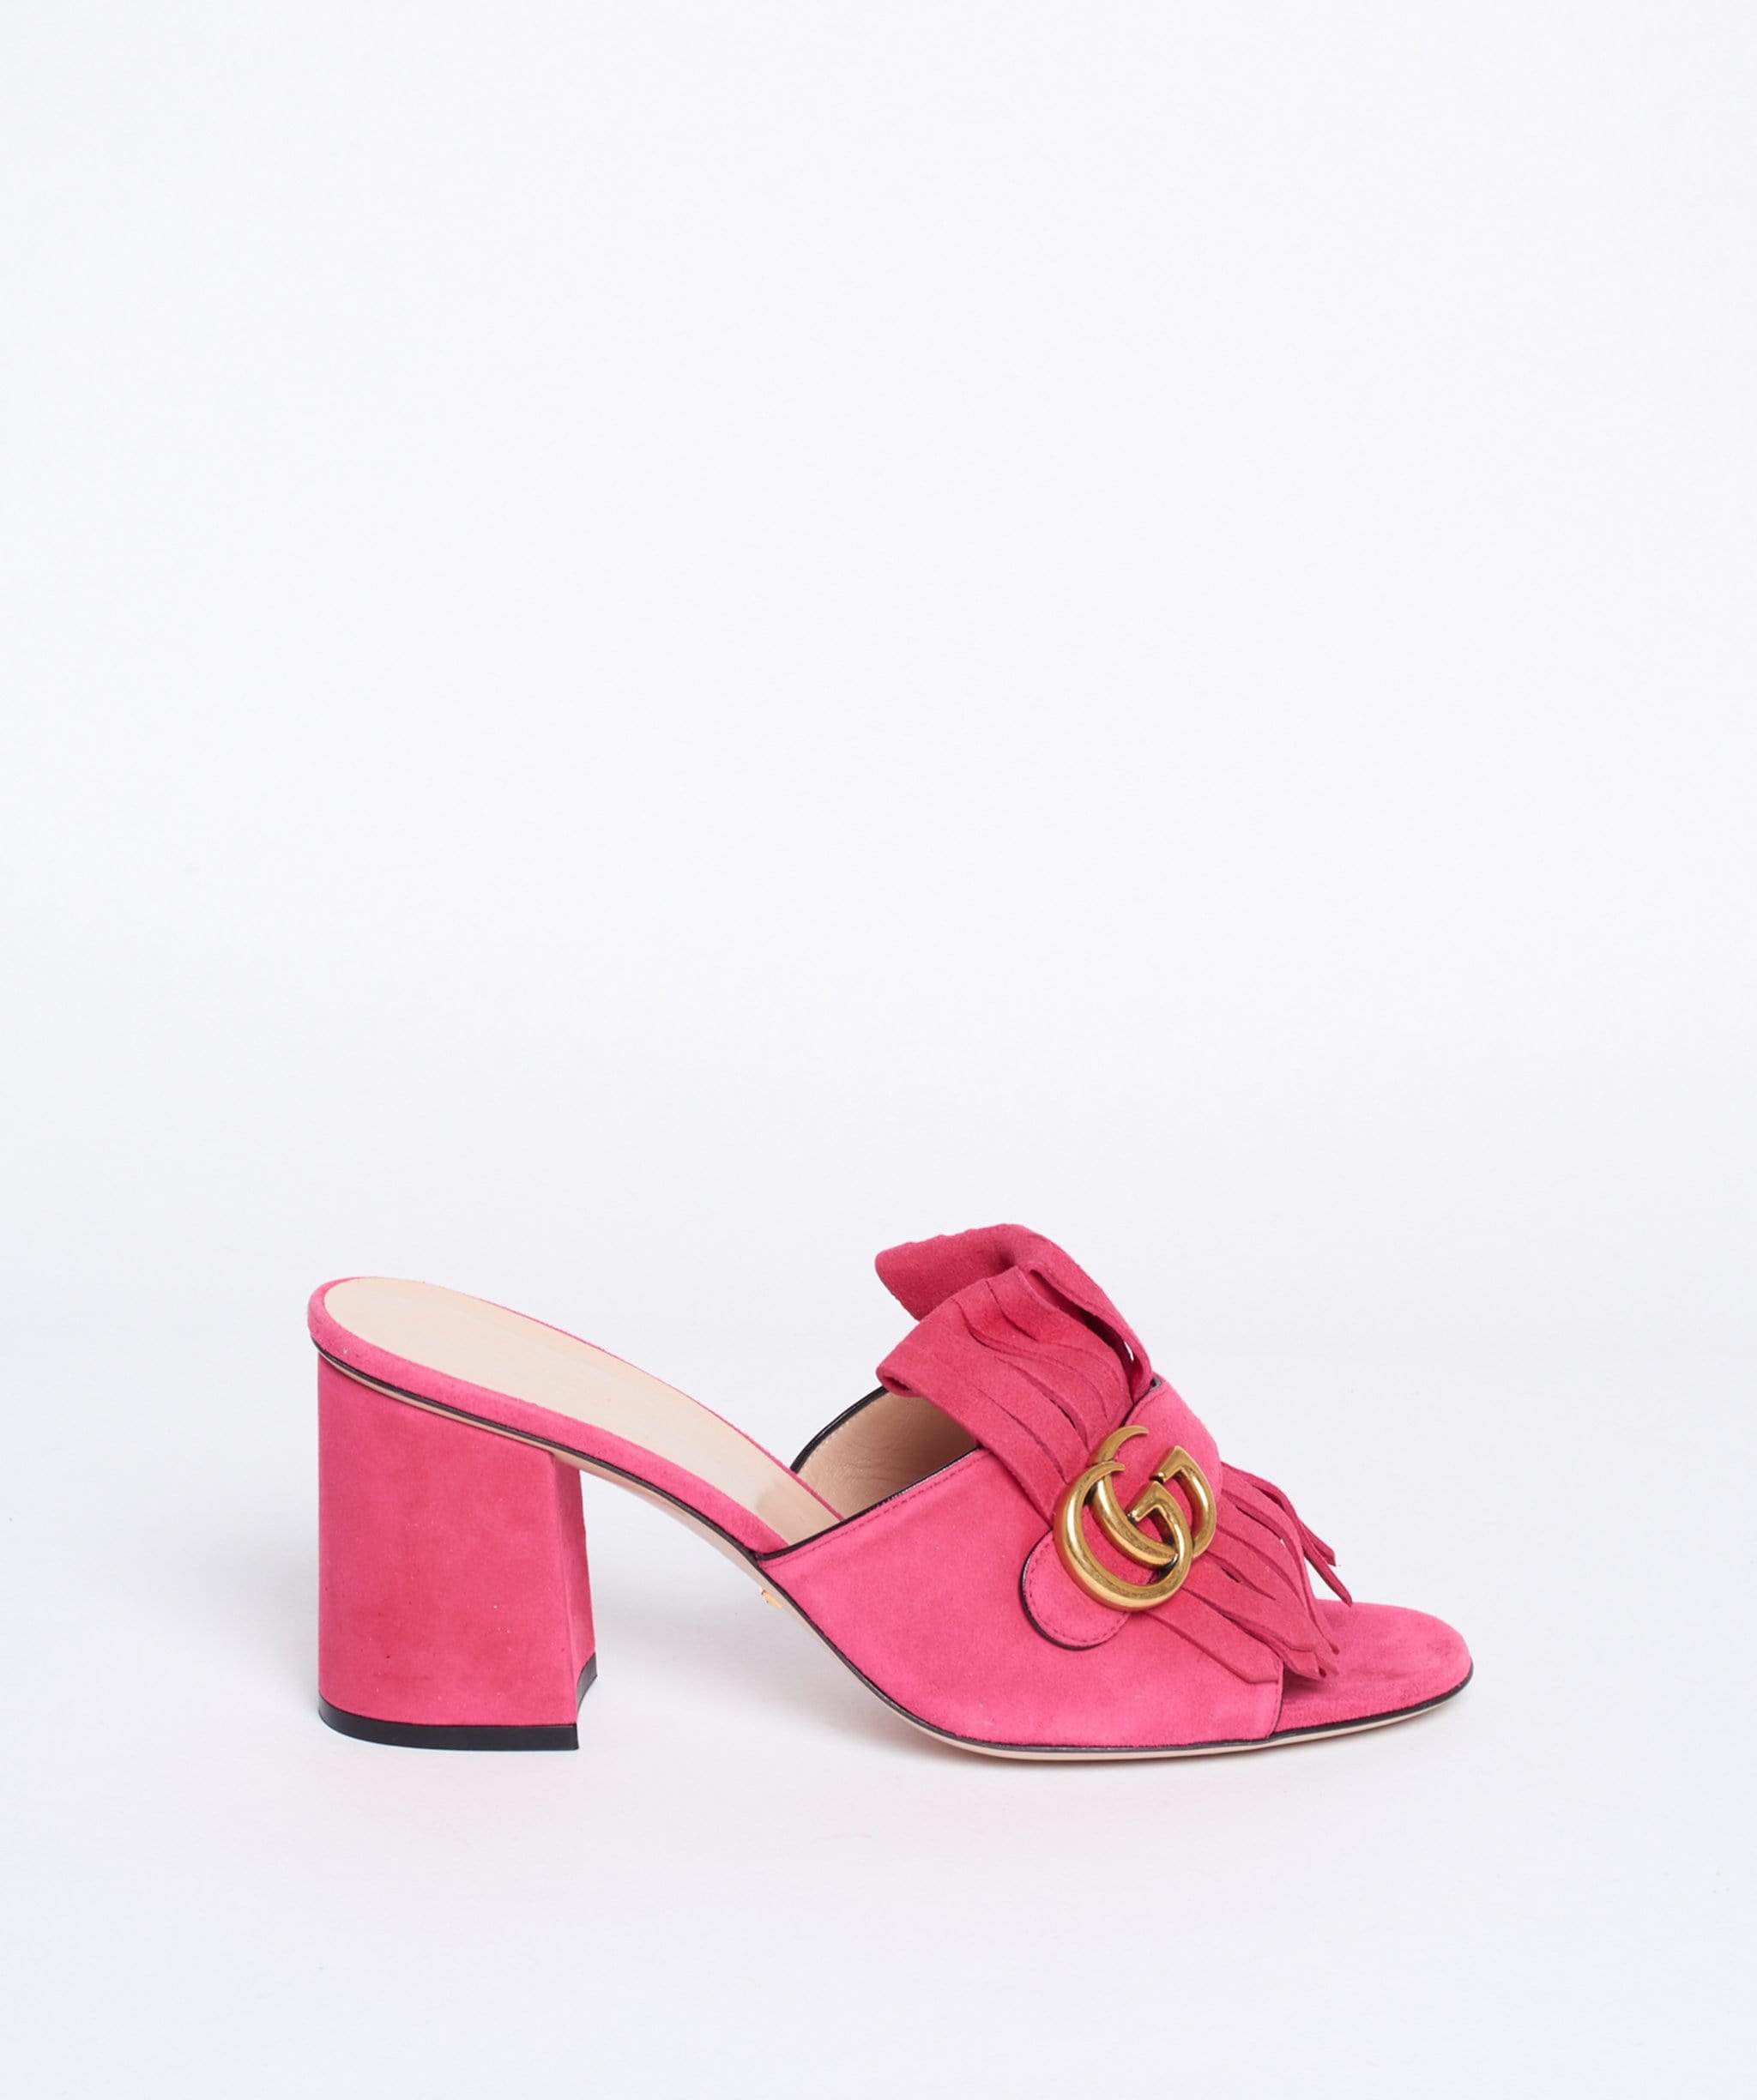 Gucci Gucci Pink Suede Marmont Mules size 39.5